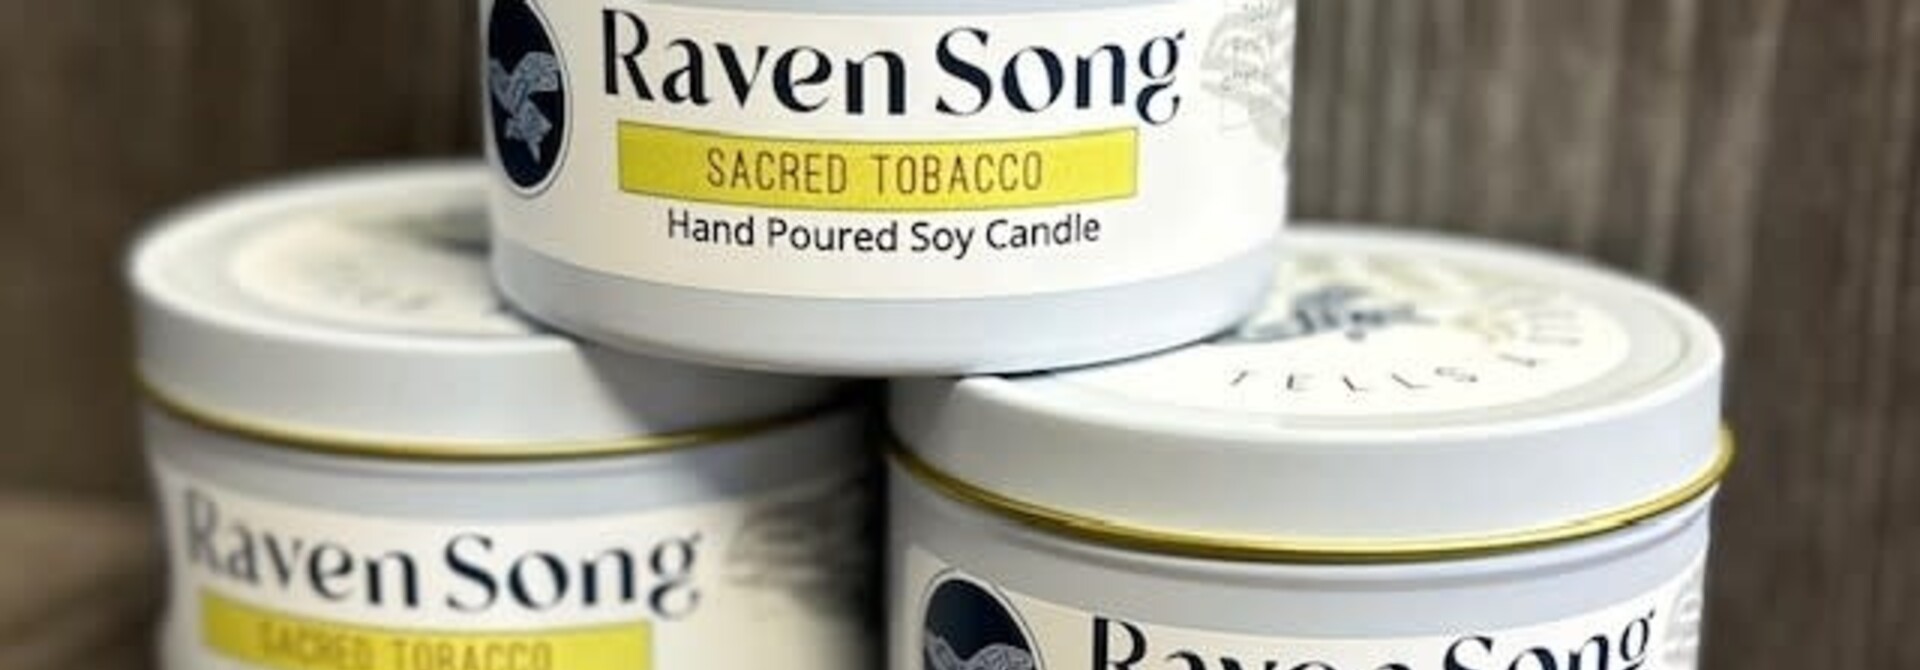 Raven Song Hand Poured Candle - Sacred Tobacco